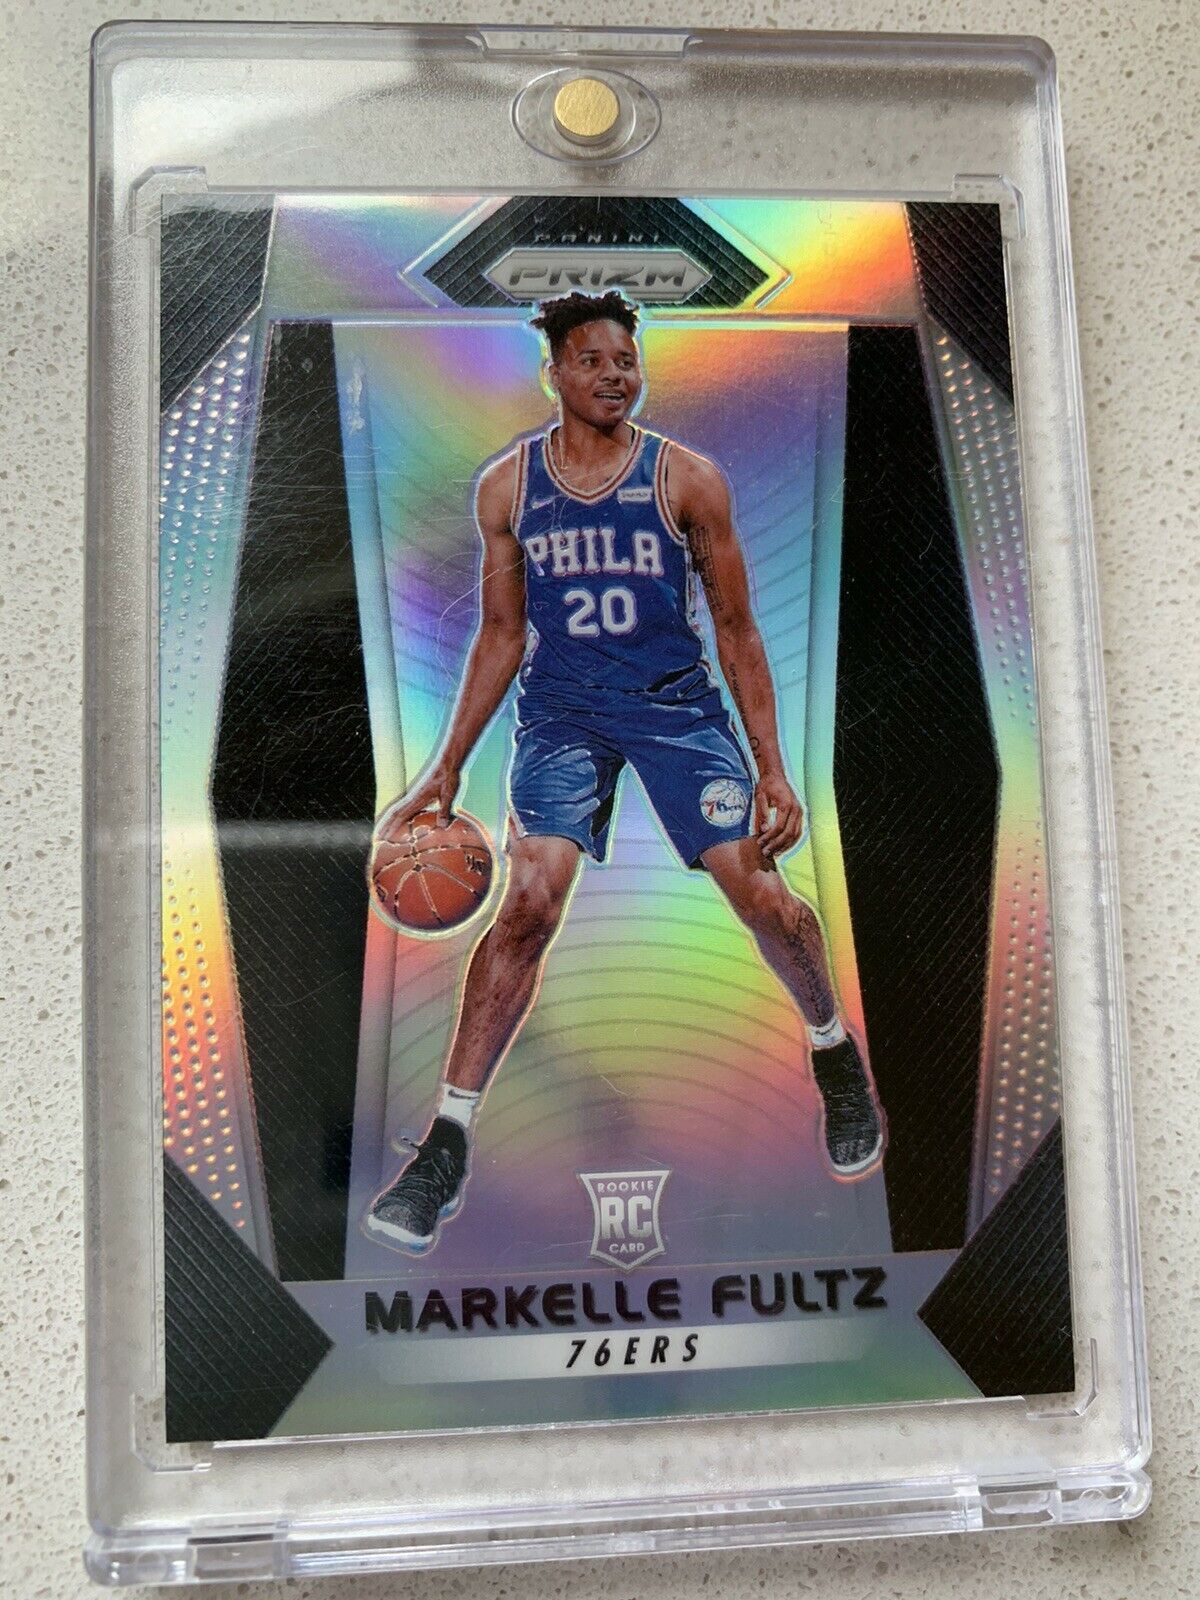 Image of Prizm Silver RC Markelle Fultz sports trading card